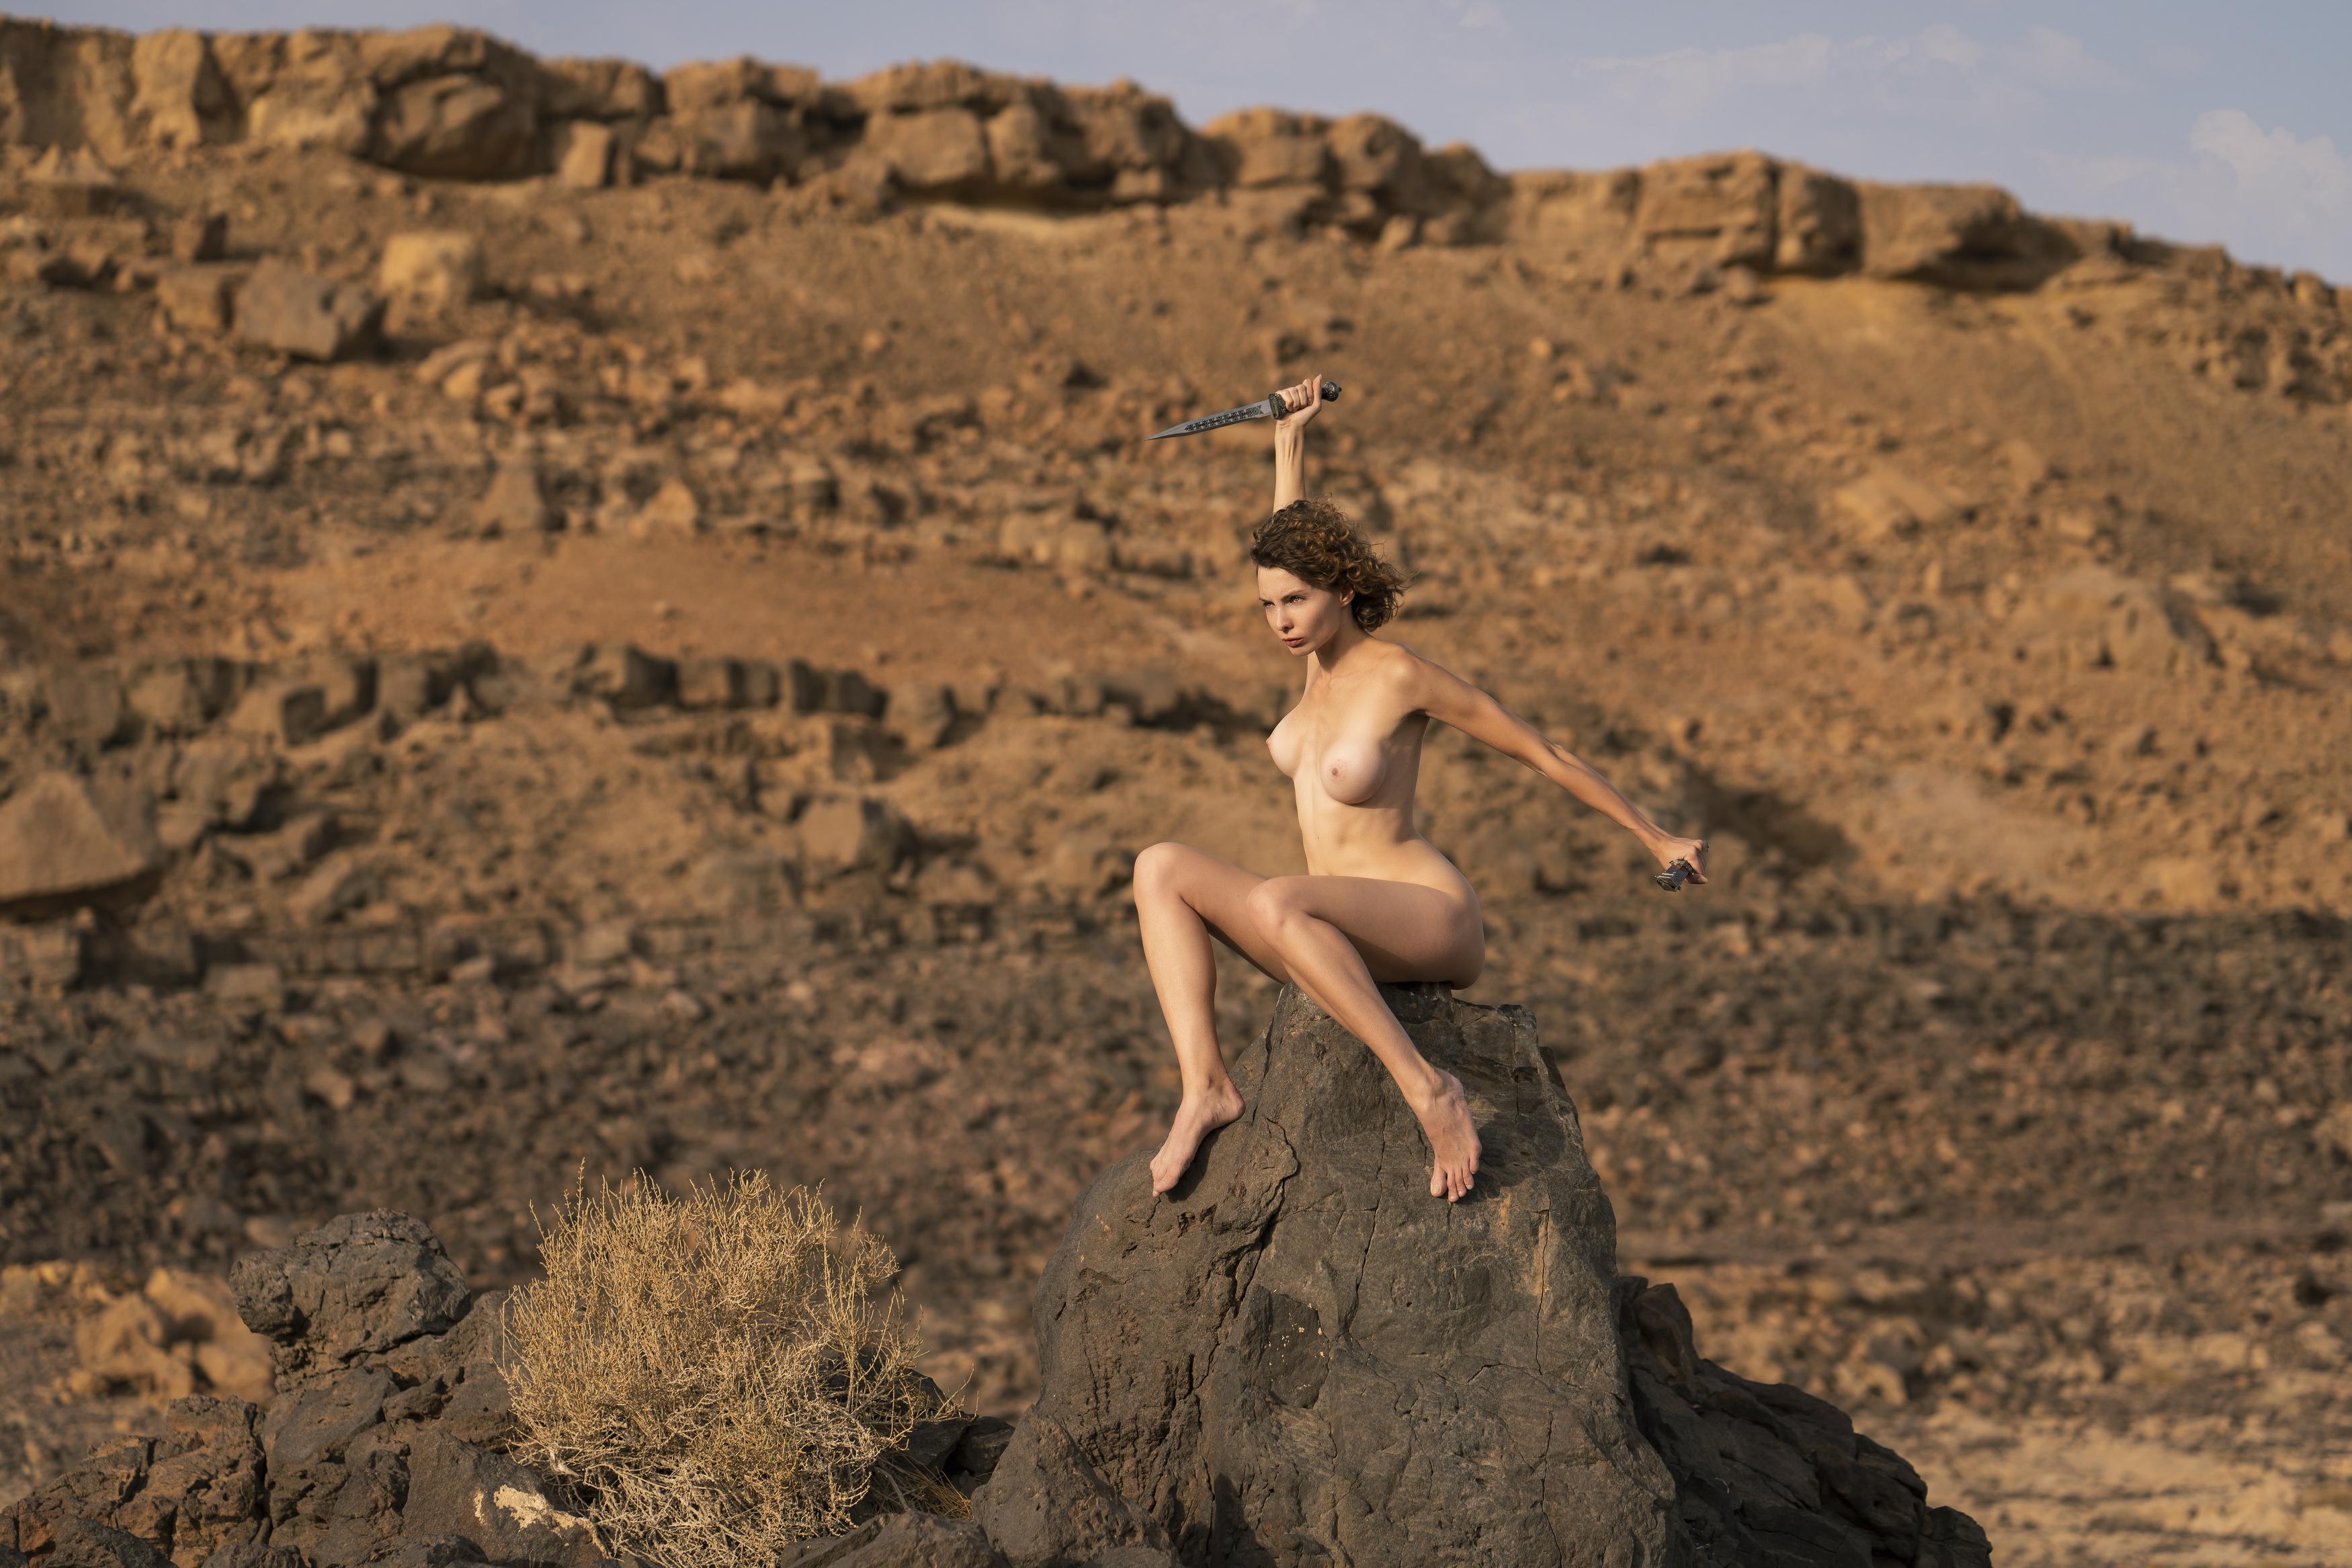 attractive, beautiful woman, beauty, dagger, desert, dry, eyes, female, grace, hair, hands, individuality, legs, look, makhtesh ramon, naked, nude, one person, outdoors, pose, rocks, sensuality, side view, sitting, sky, stones, young women, Alex Tsarfin